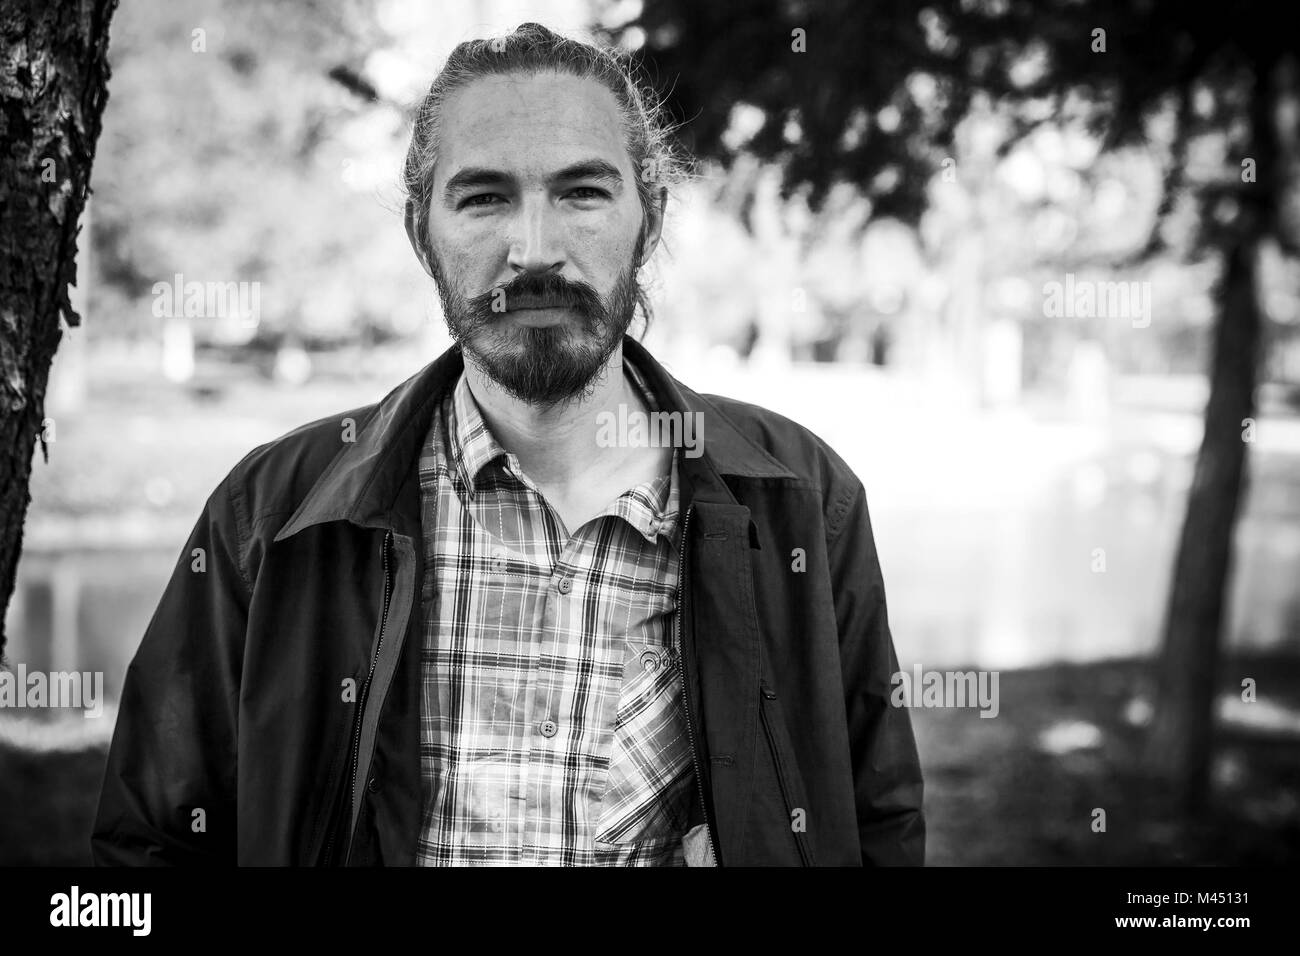 Outdoor black and white portrait of young bearded smiling man Stock Photo